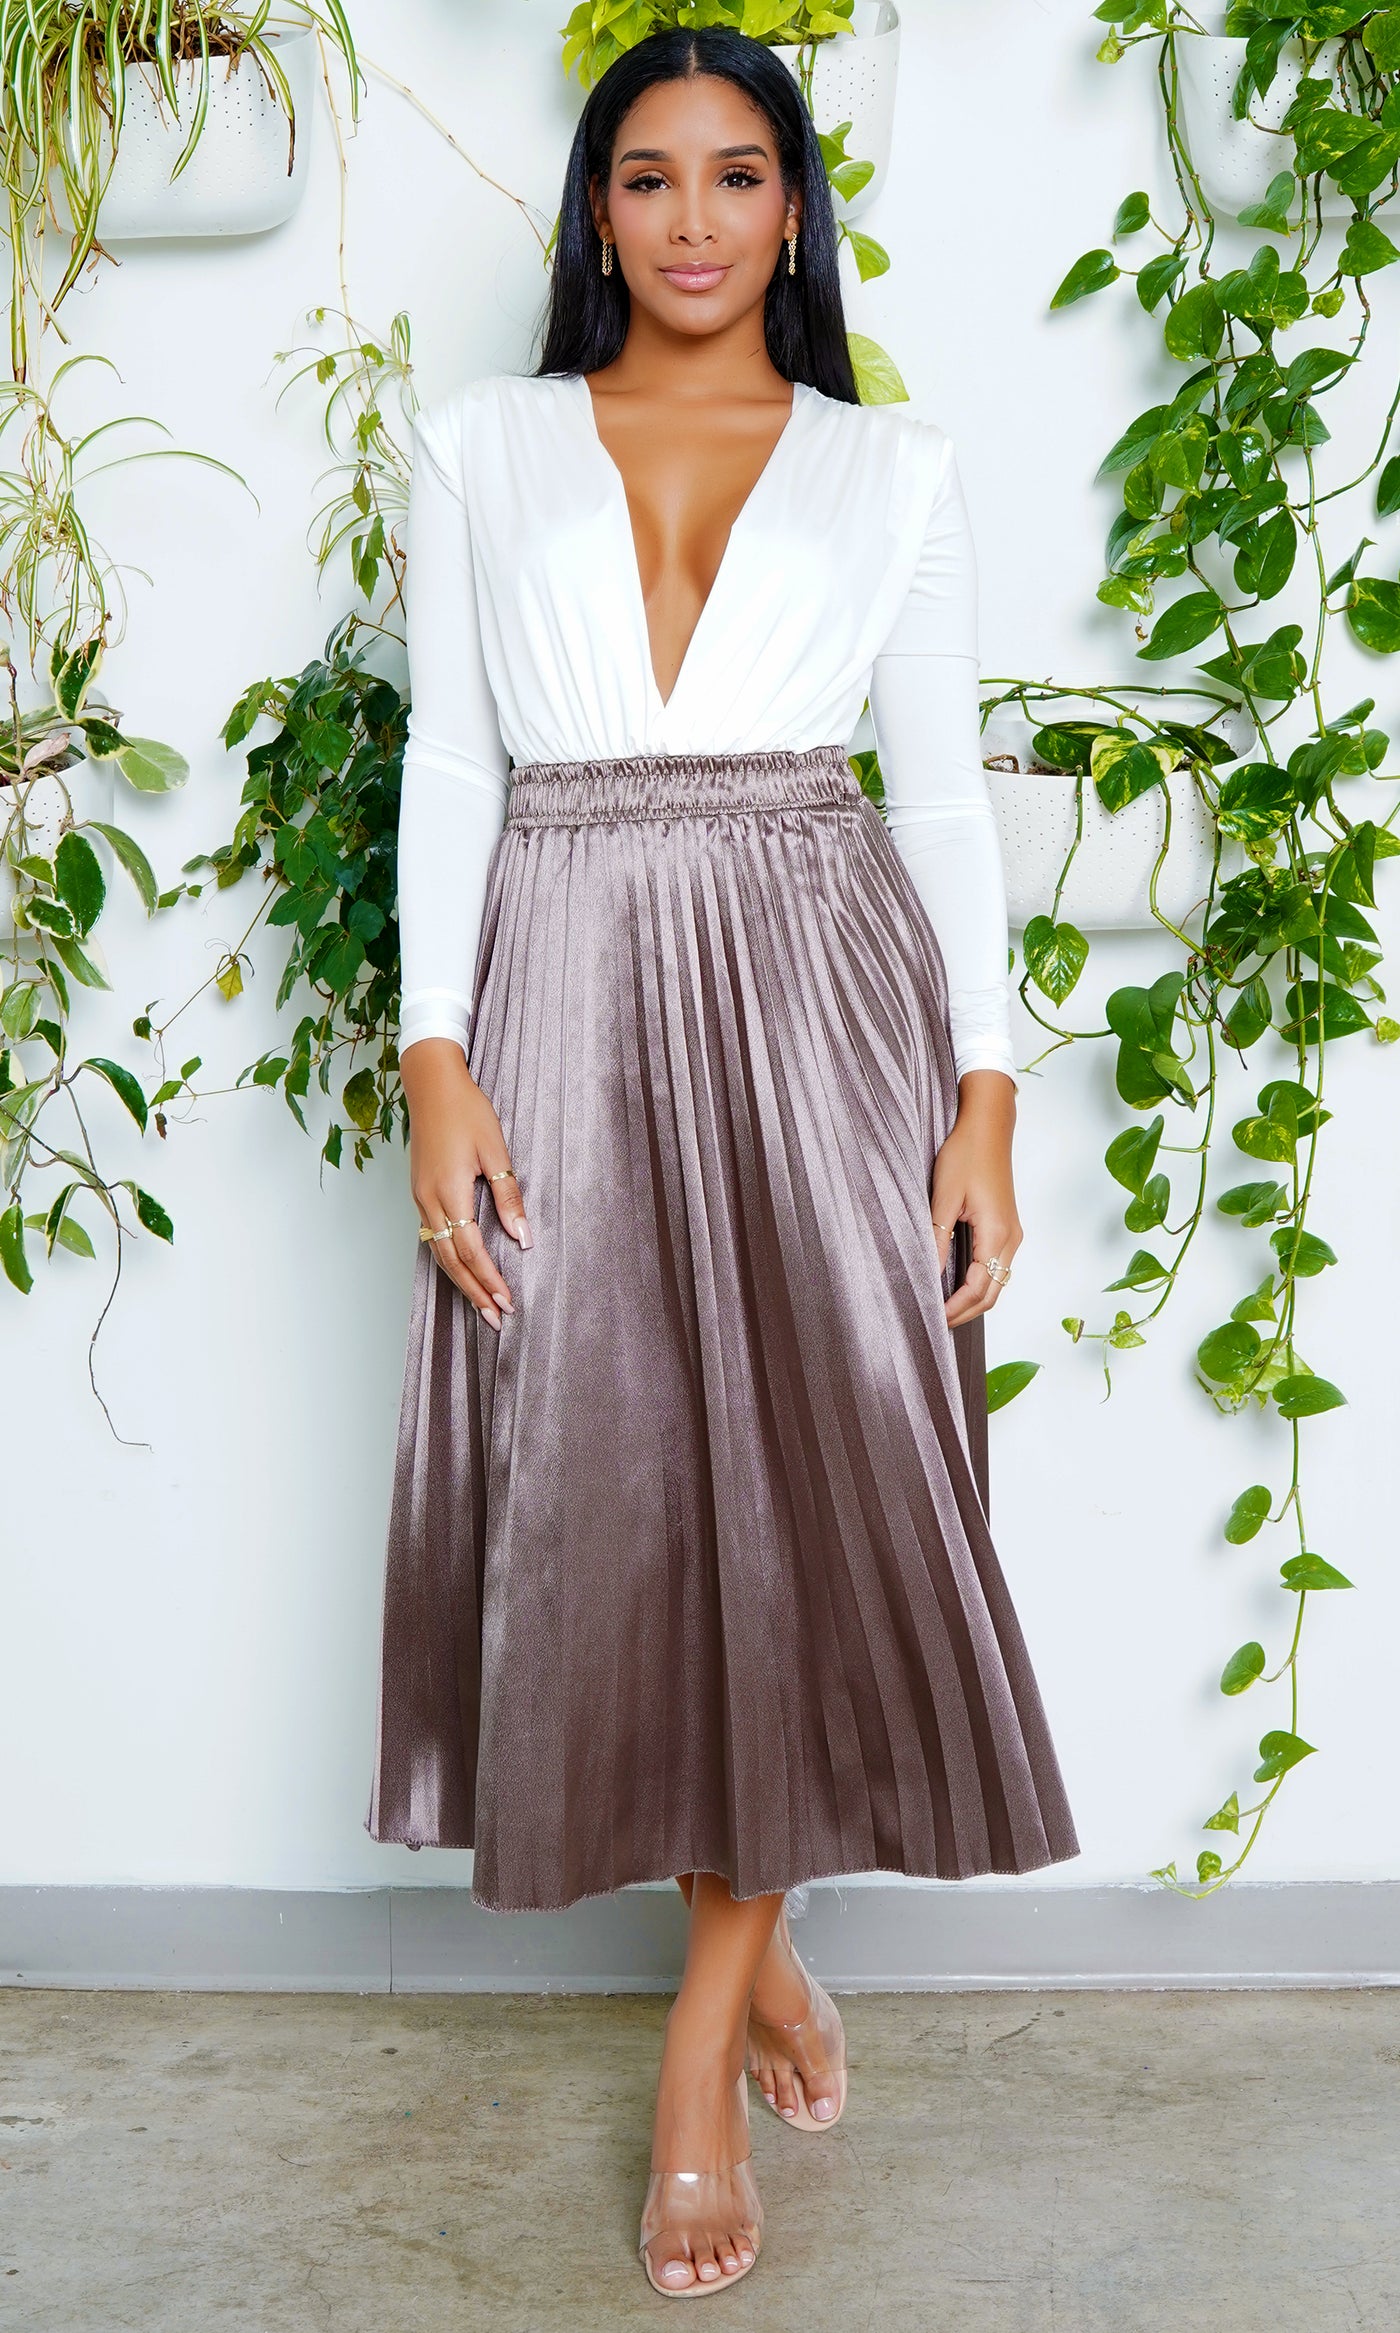 The "Step it up" Metallic Pleated Skirt - Cutely Covered